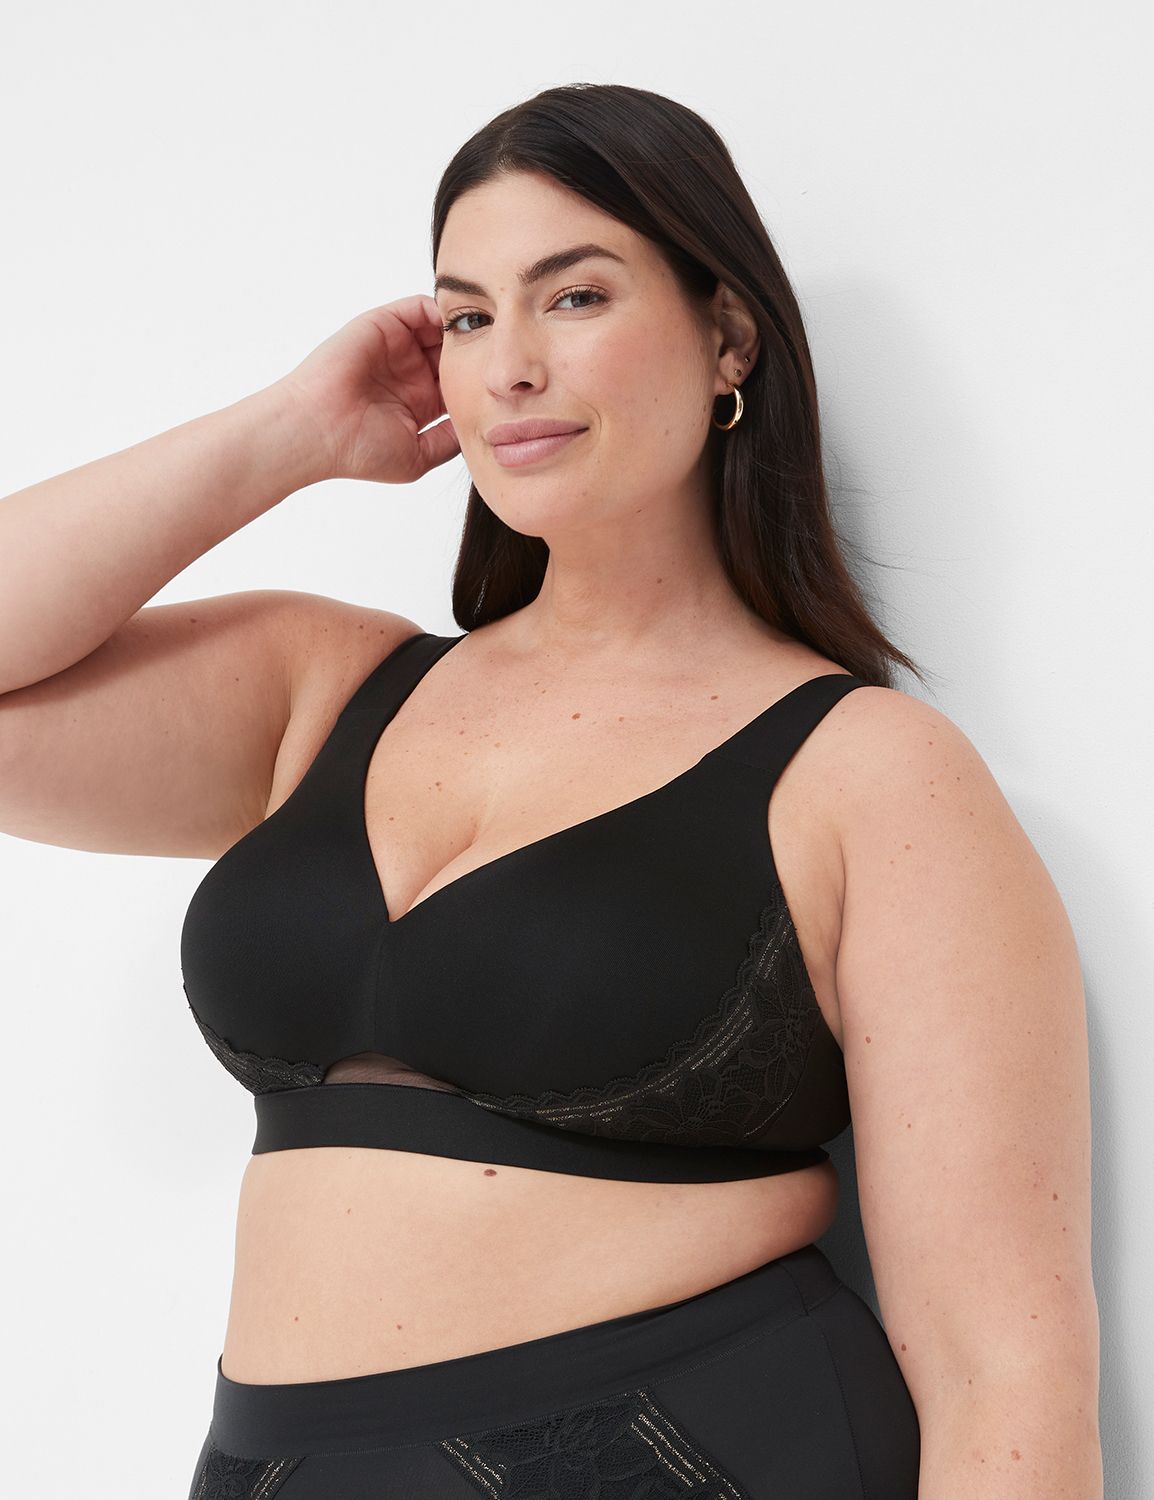 Simply Wire Free, Lane Bryant, Later pokes. Buh-bye pinches. There's a  new way to wire and you. will. love. #Cacique